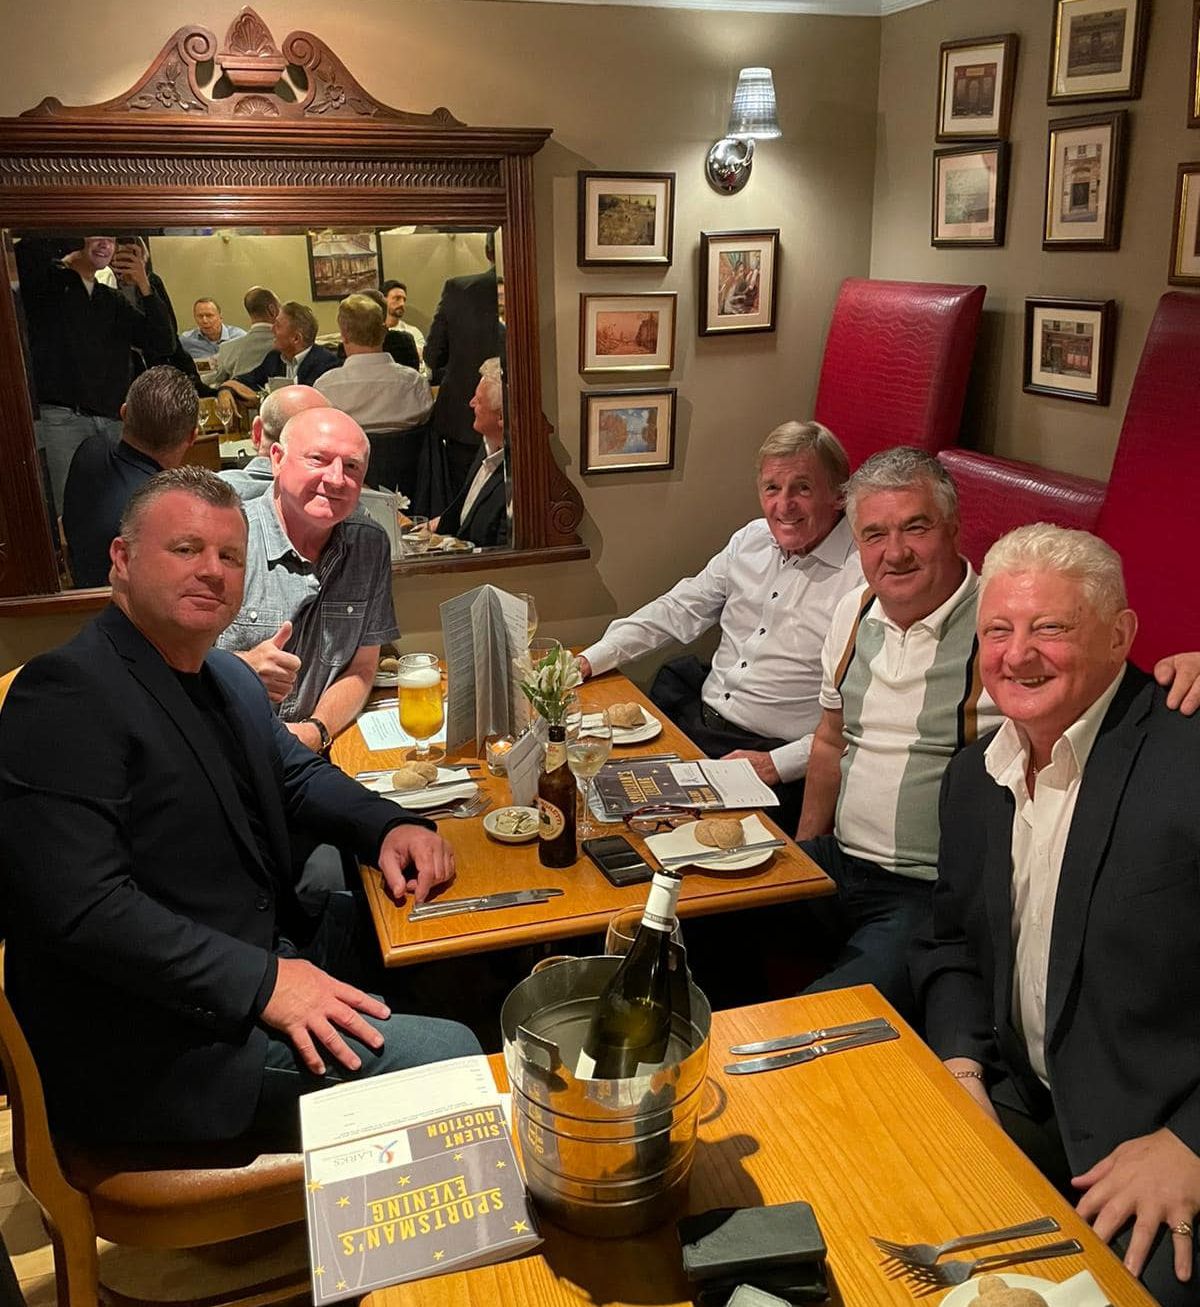 Neil Gokcen hosted a fundraising Sportsmans Dinner at Auberge restaurant in Southport to raise money for The Larks / Marina Dalglish Appeal in memory of his wife Catherine